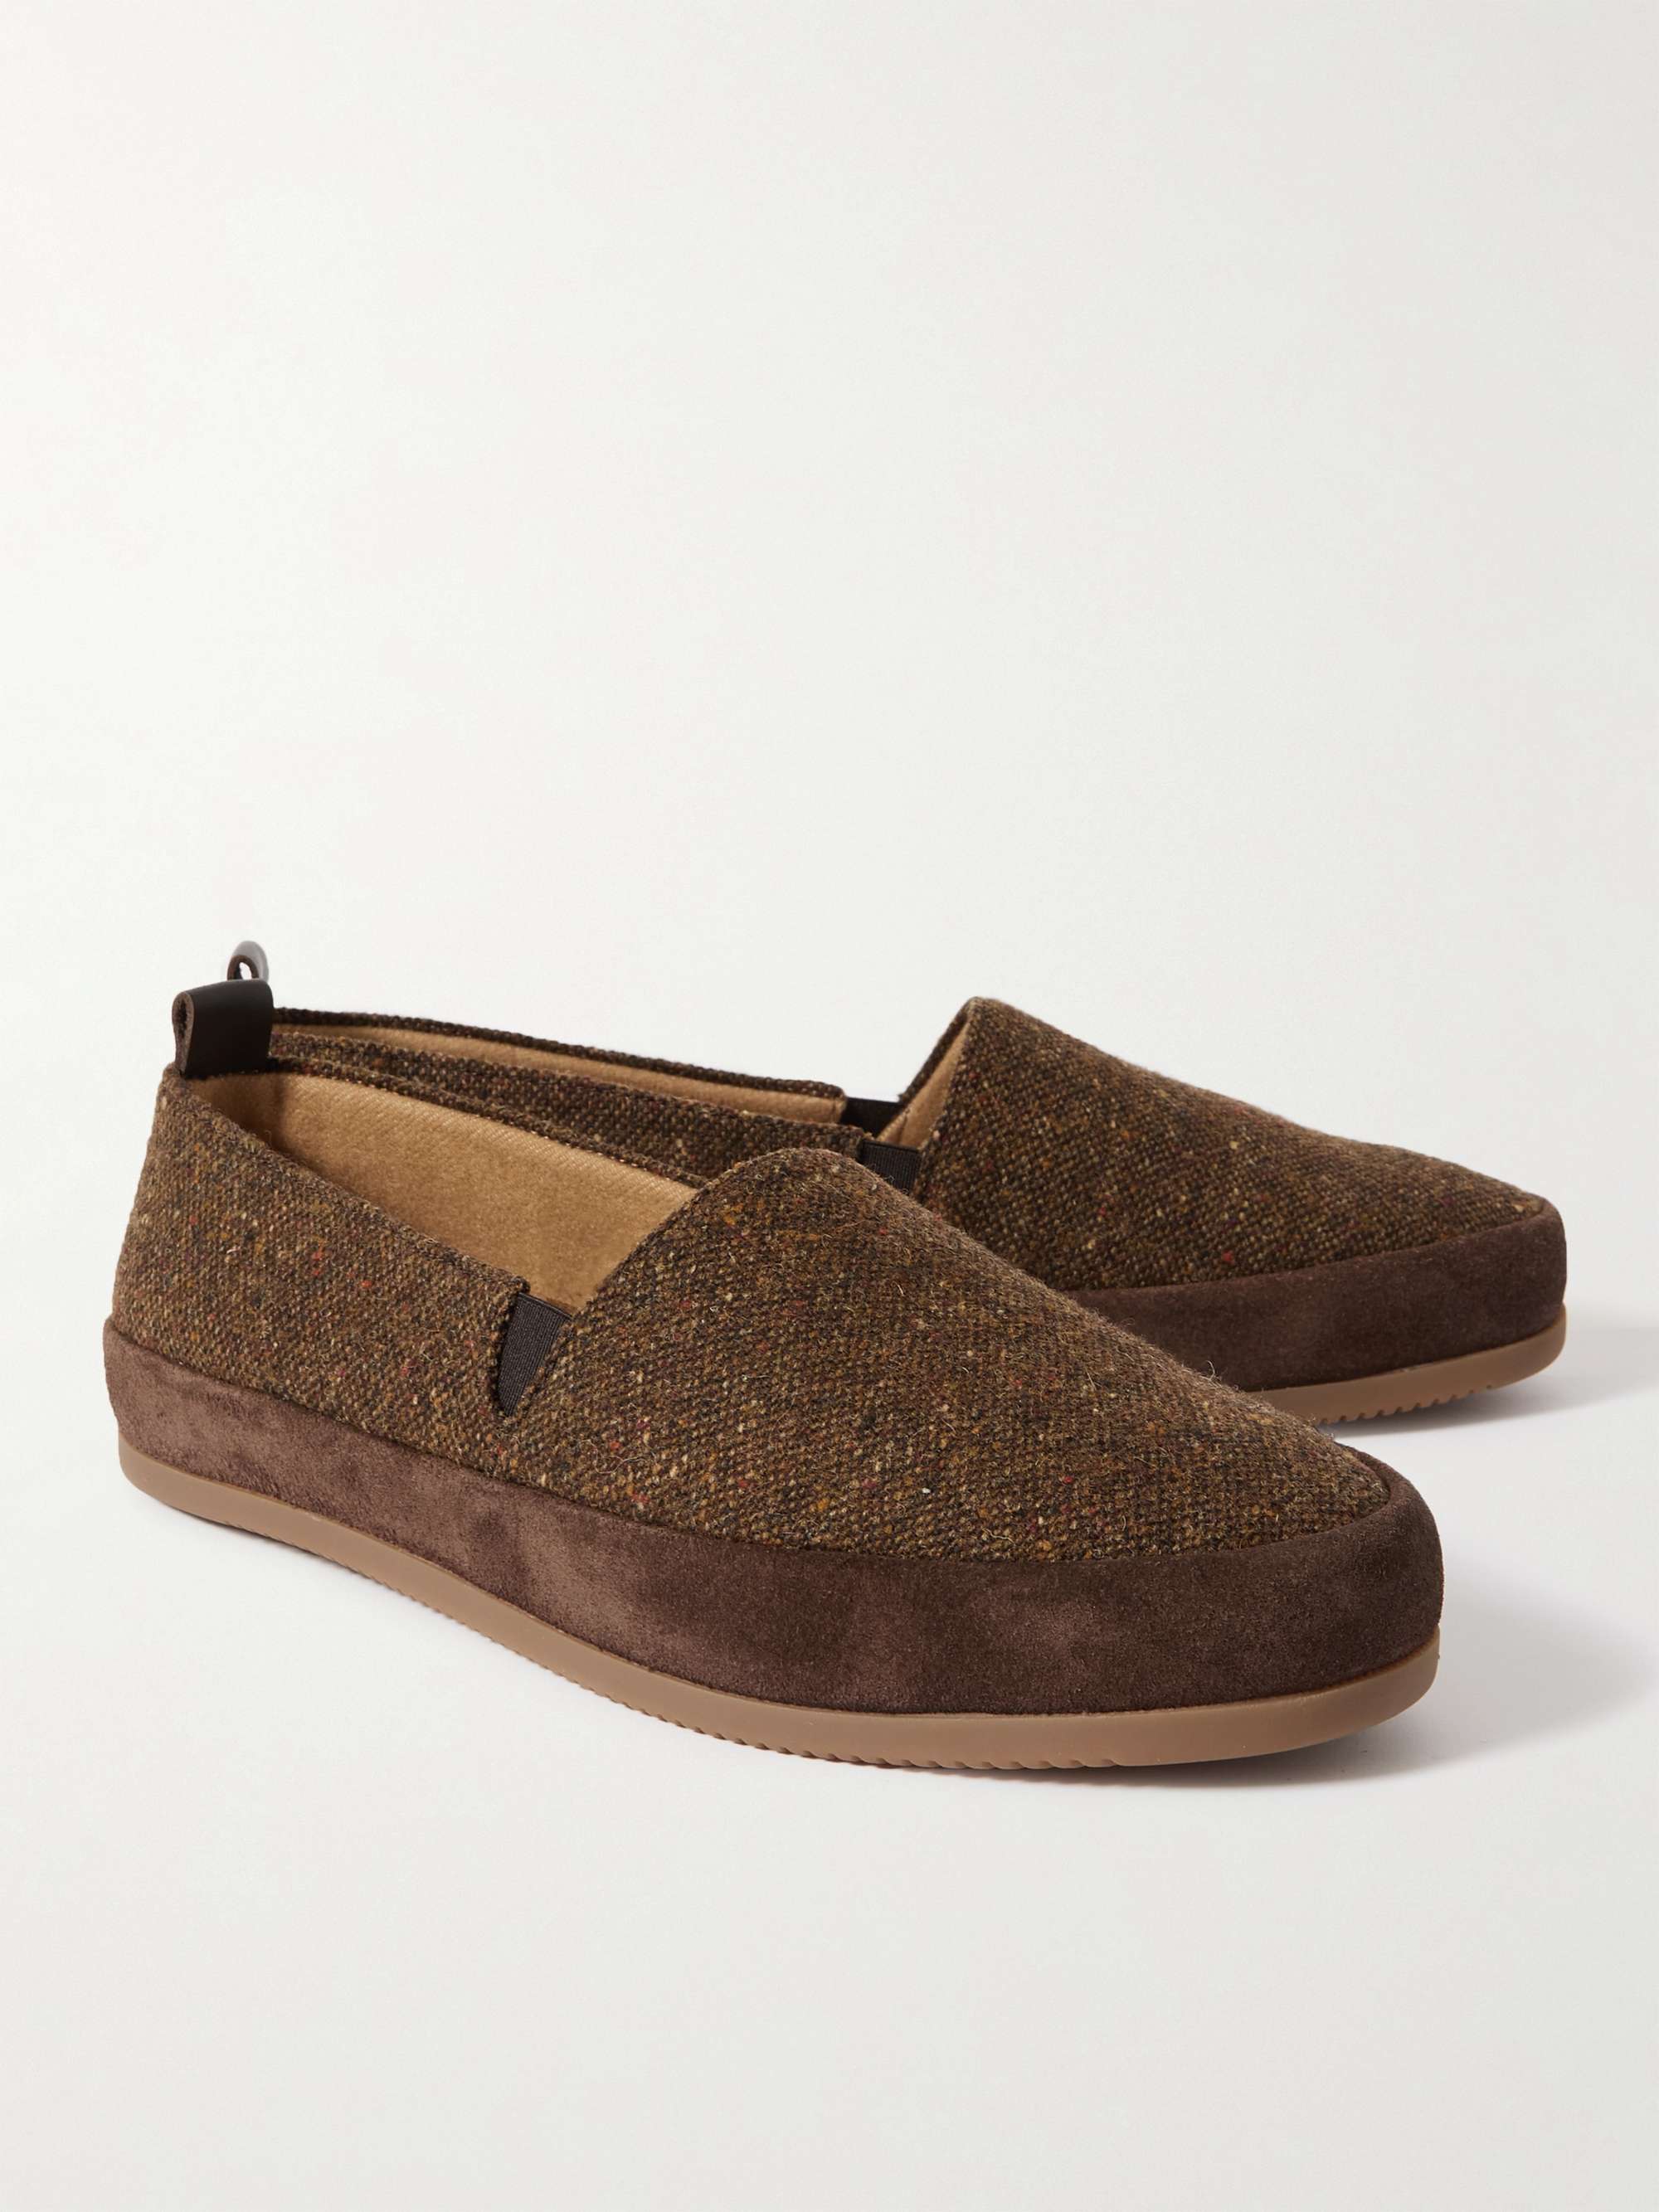 MULO Suede-Trimmed Tweed Loafers